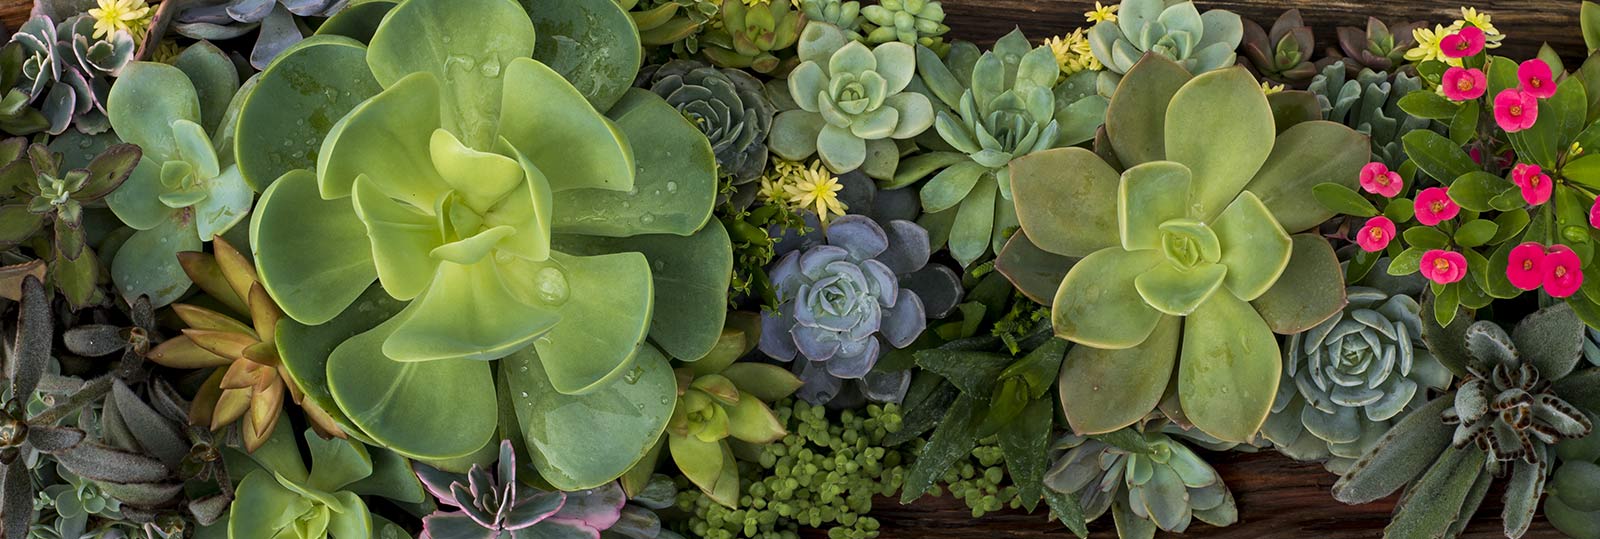 Succulents & Cacti Gift Delivery – Chicago Floral Designs